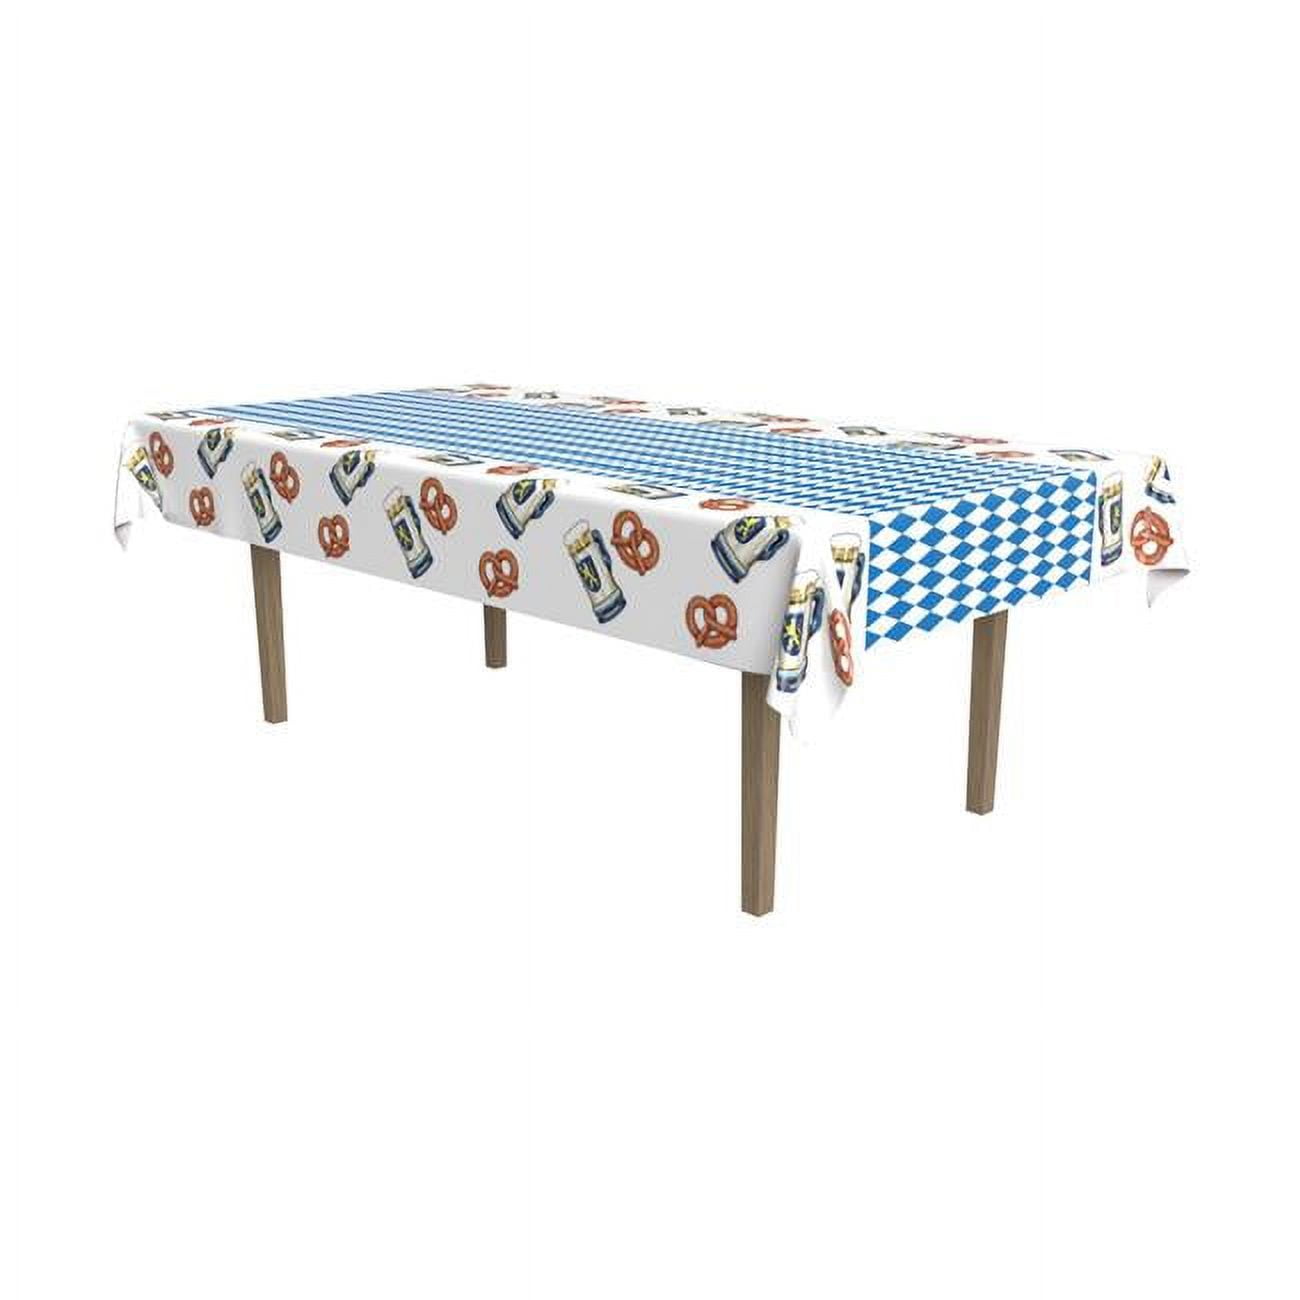 Picture of Beistle 53998 Oktoberfest Tablecover, Pack of 12